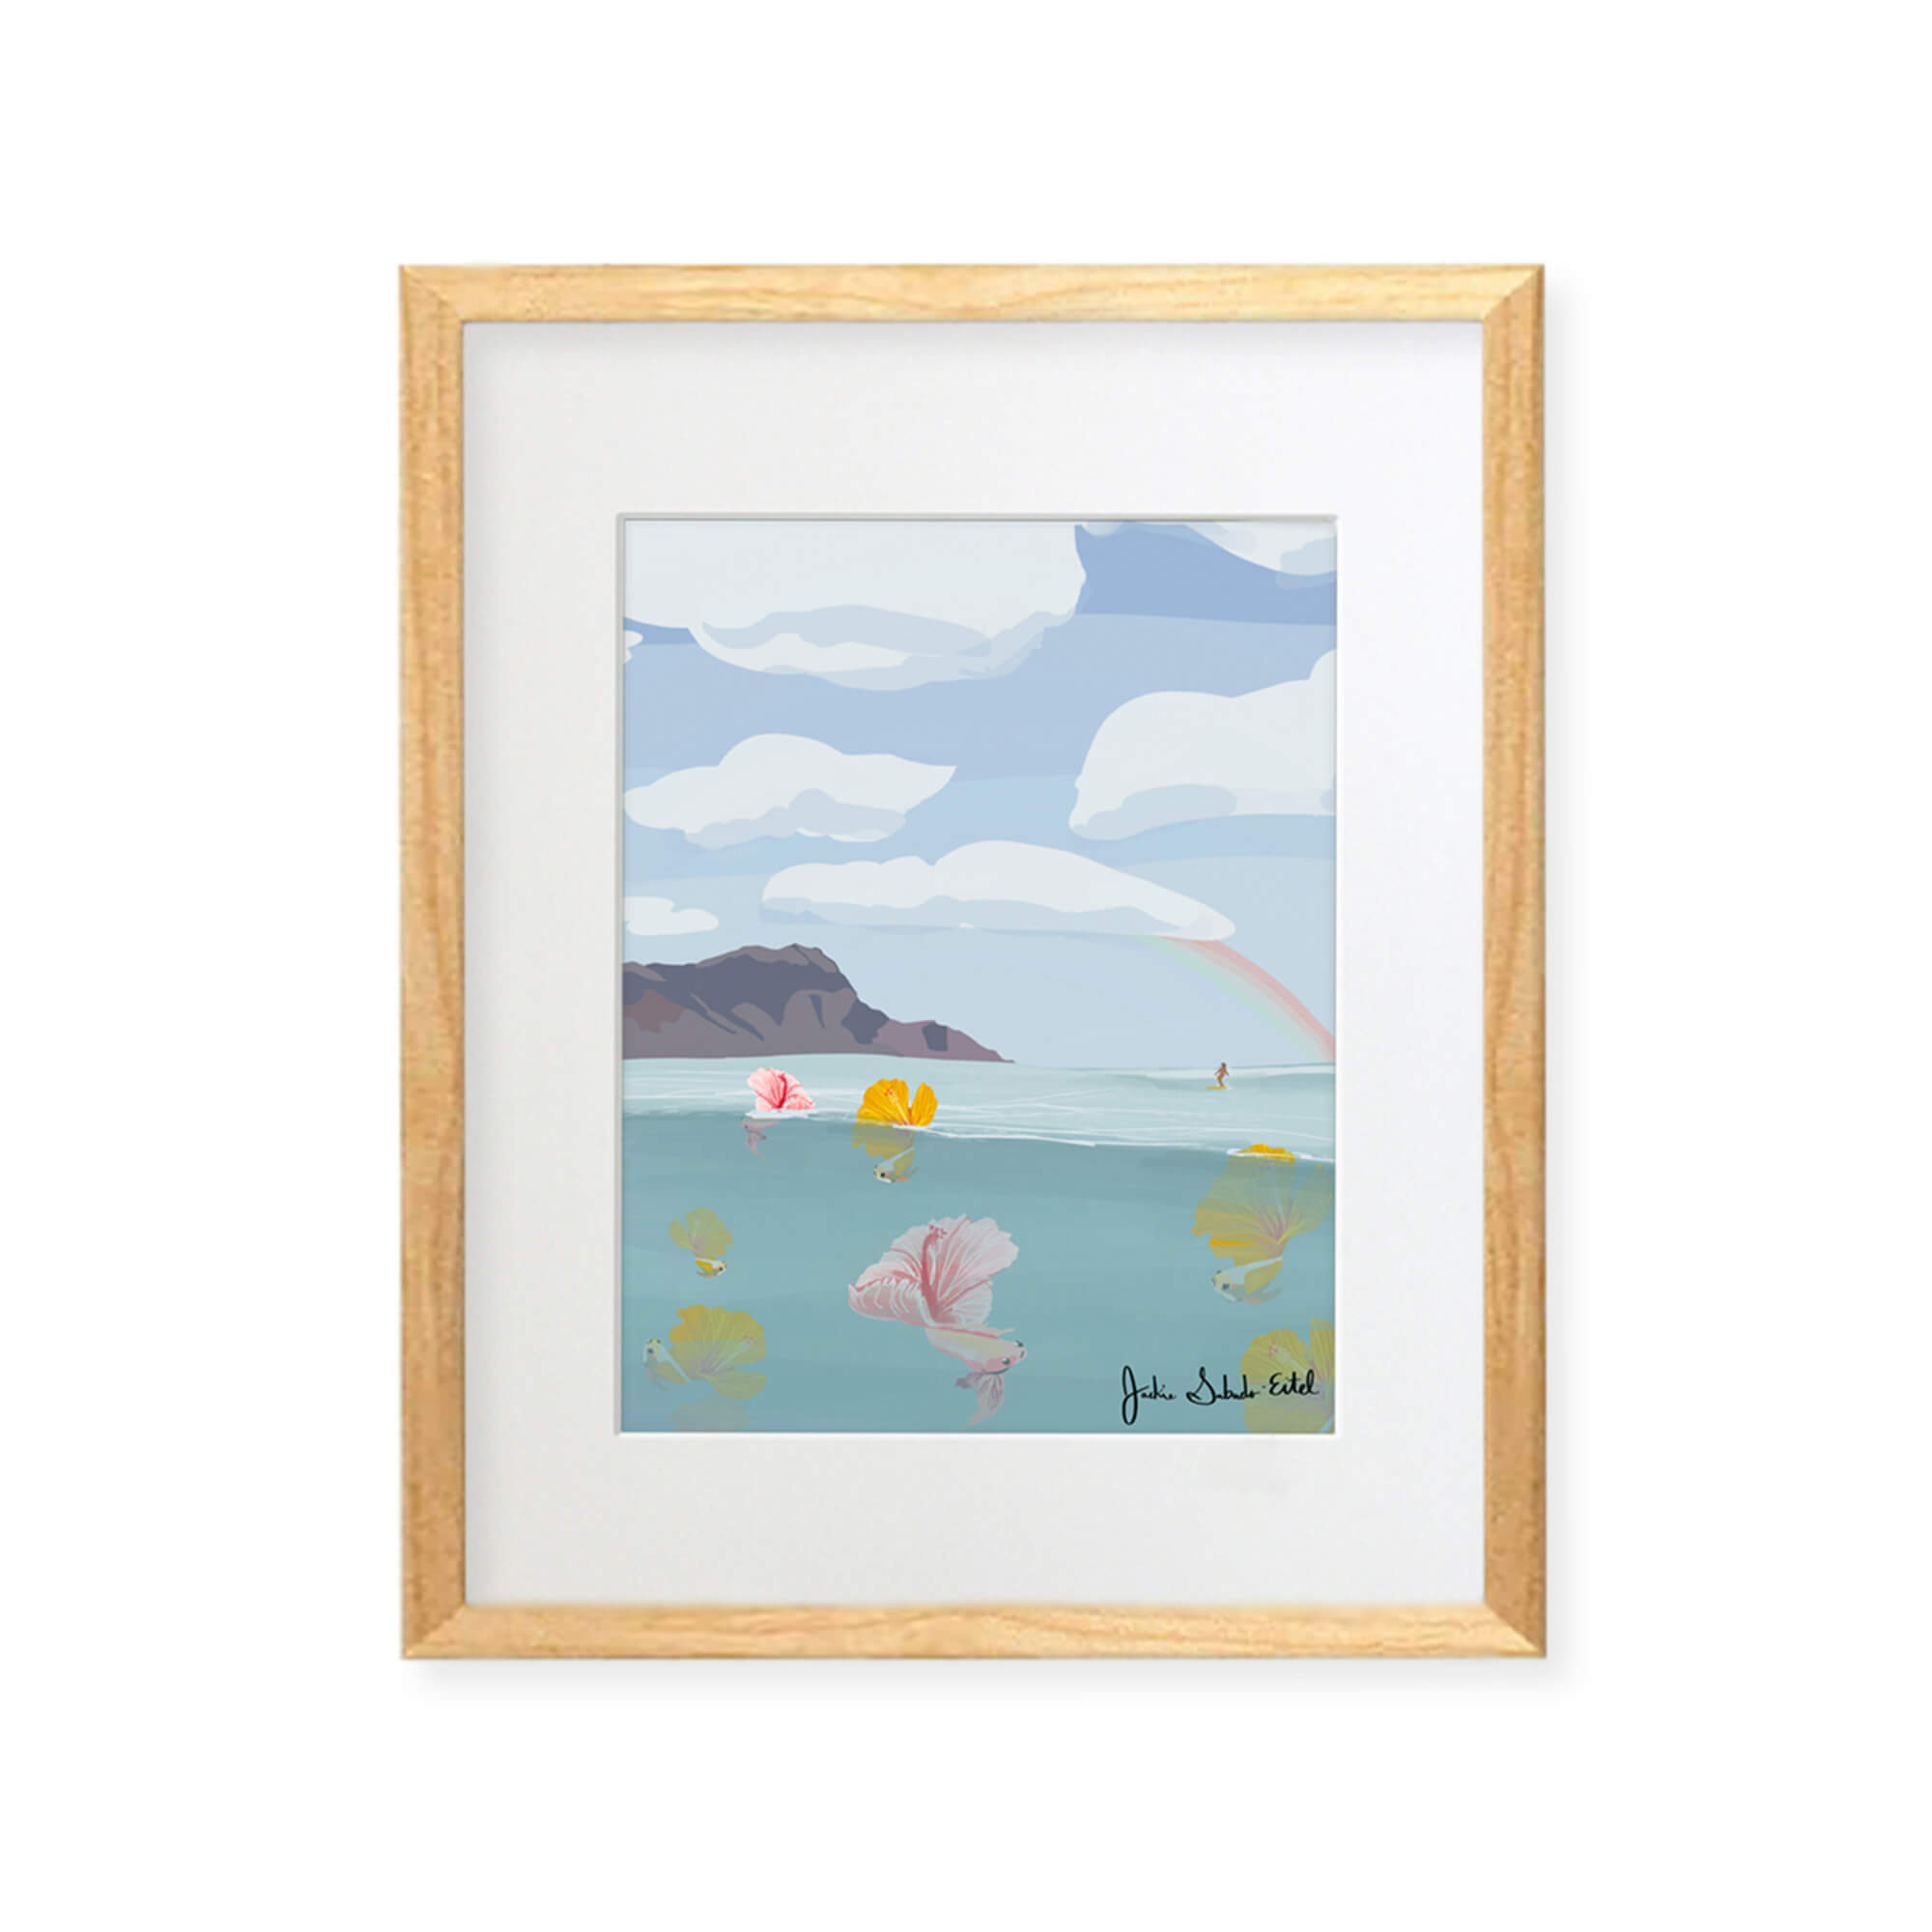 A framed matted art print featuring colorful tropical fish with hibiscus flowers as their tails, the Diamond Head in the background with a woman surfing by Hawaii artist Jackie Eitel